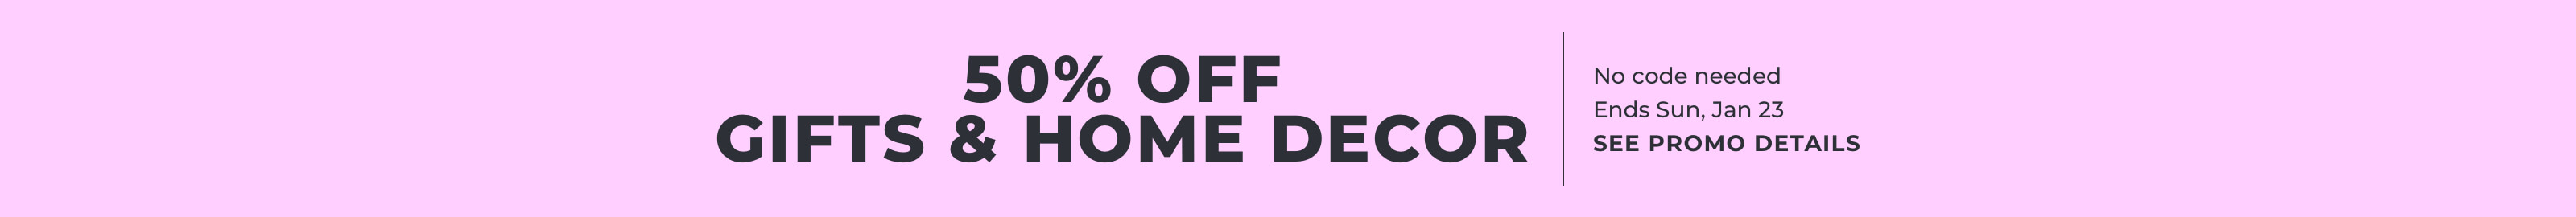 50% off gifts & home decor, no code needed, Ends Sun, Jan 23, See promo details